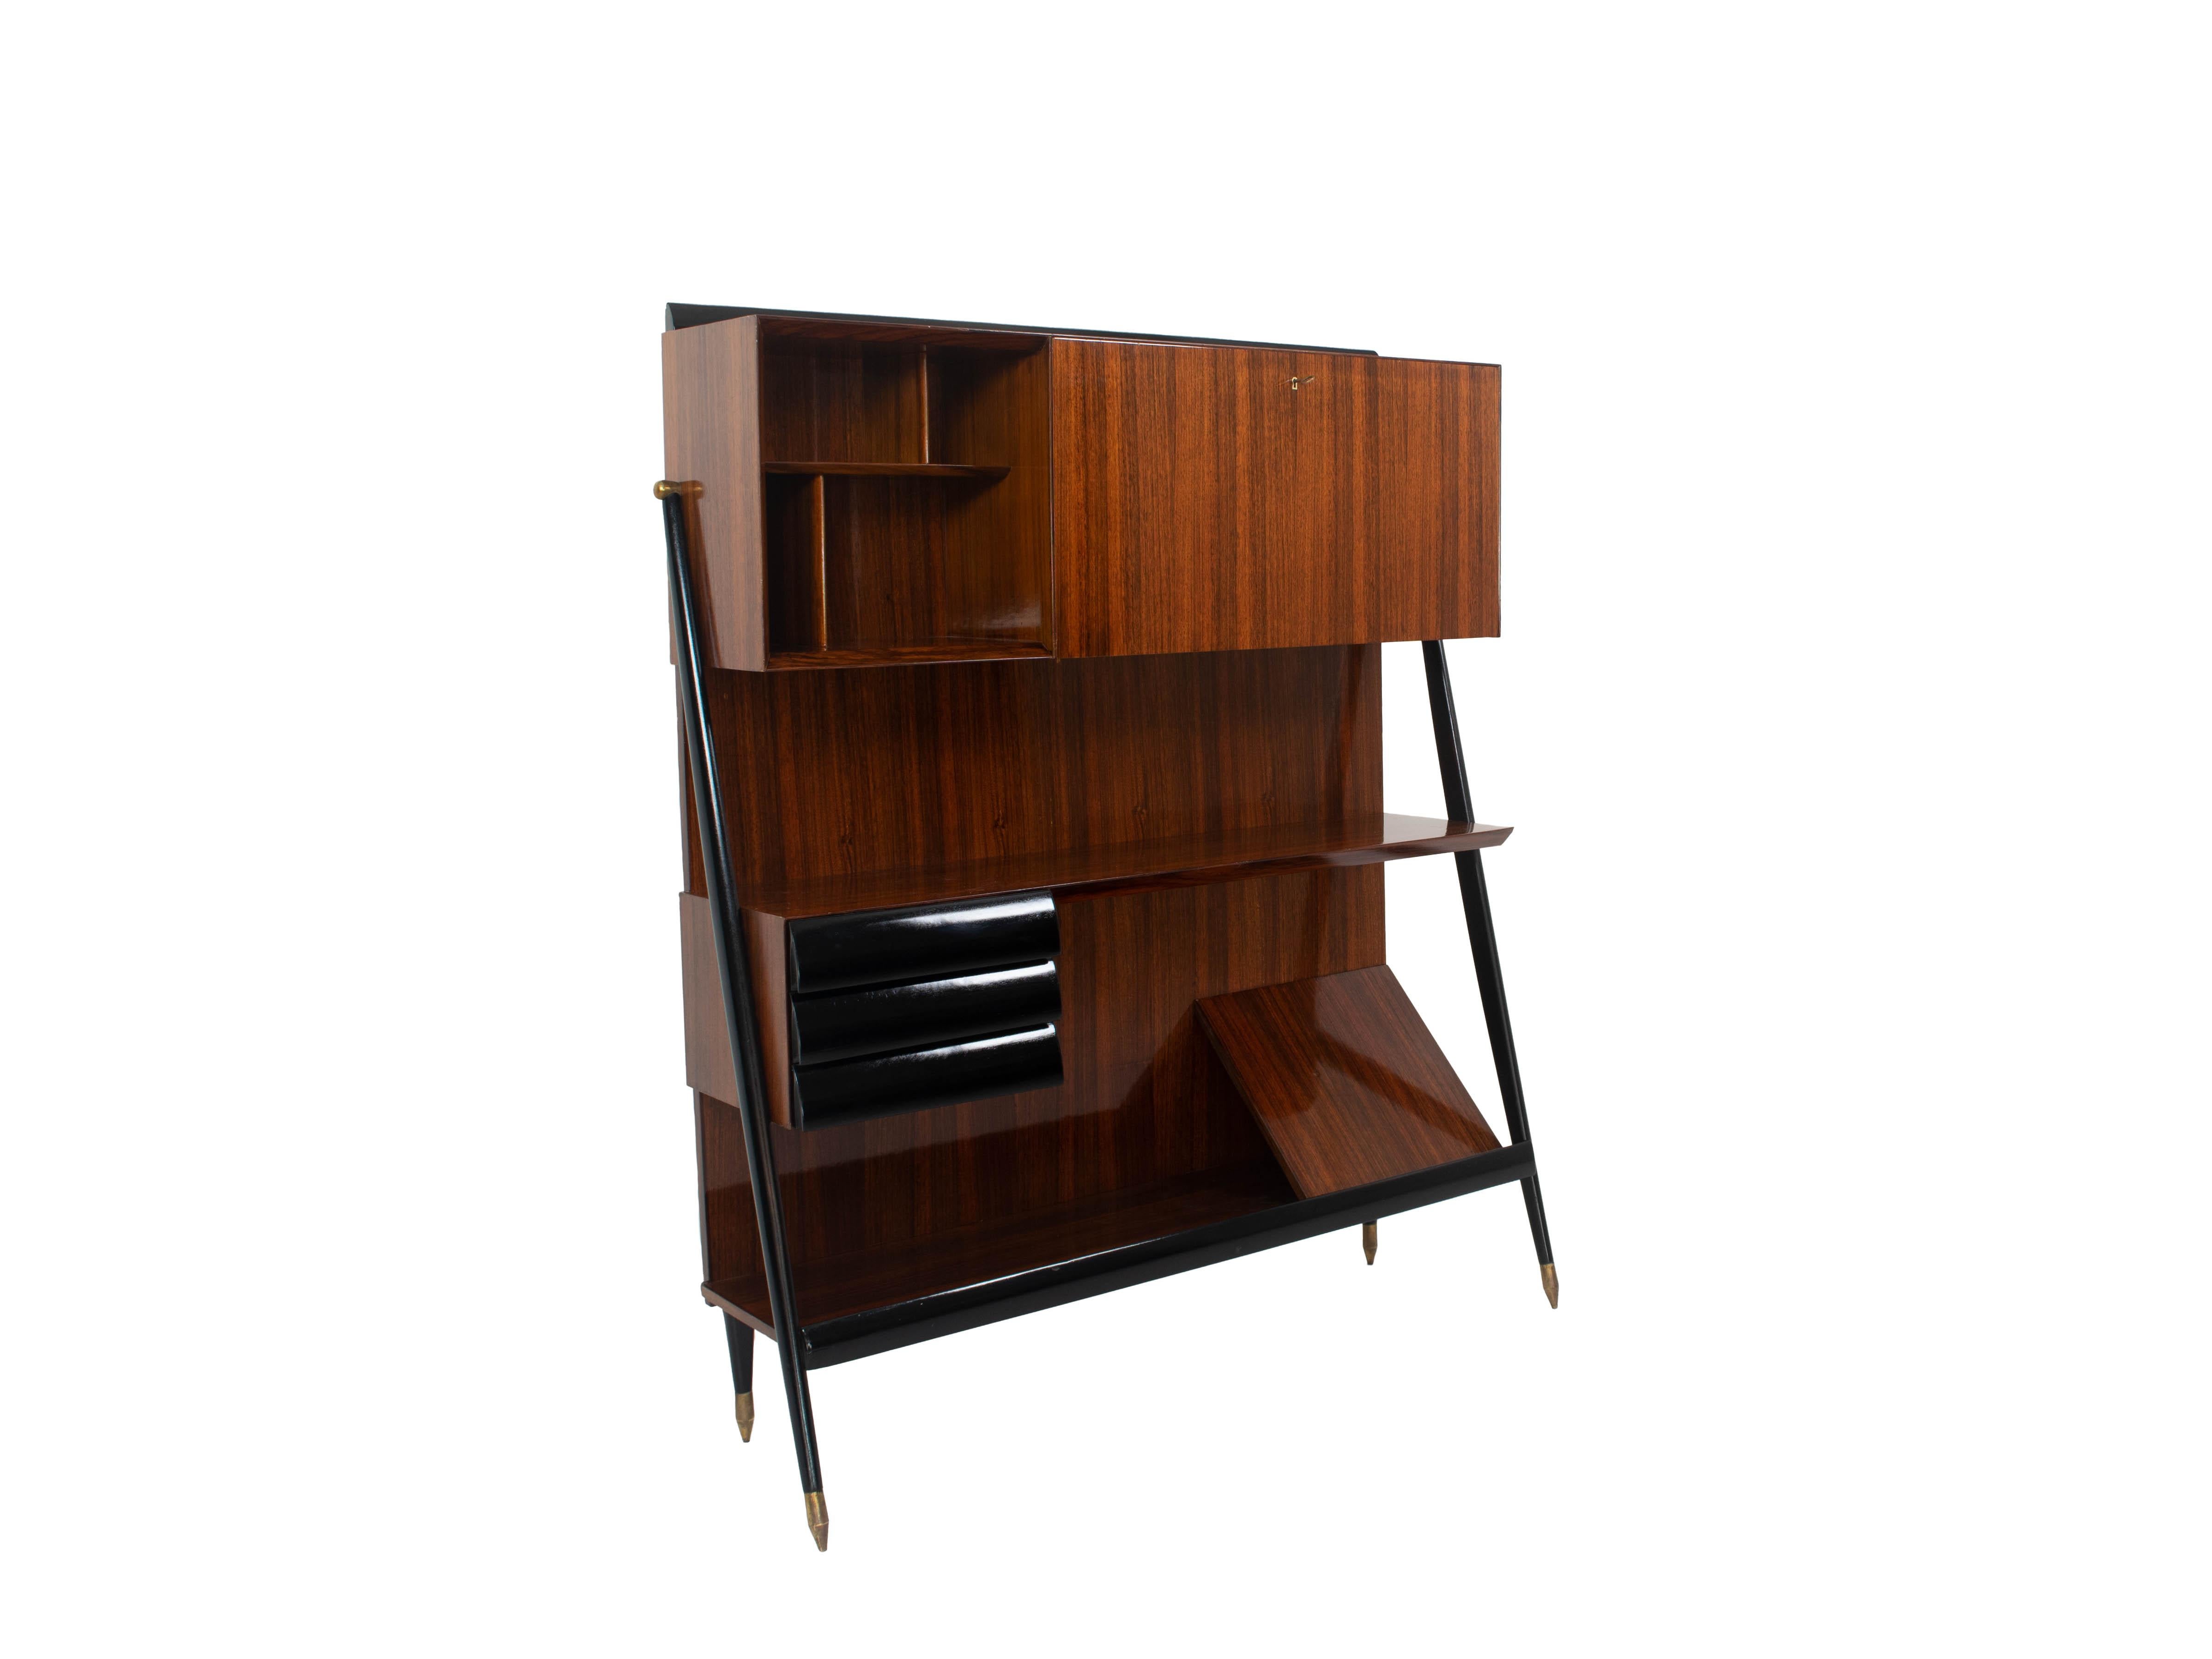 Italian vintage book cabinet or bar cabinet attributed to Ico Parisi, 1950s. This amazing piece of furniture is made of wood and ebonized wood and has two functions; it can serve as a book cabinet, but also has a bar corner to be a bar cabinet. It